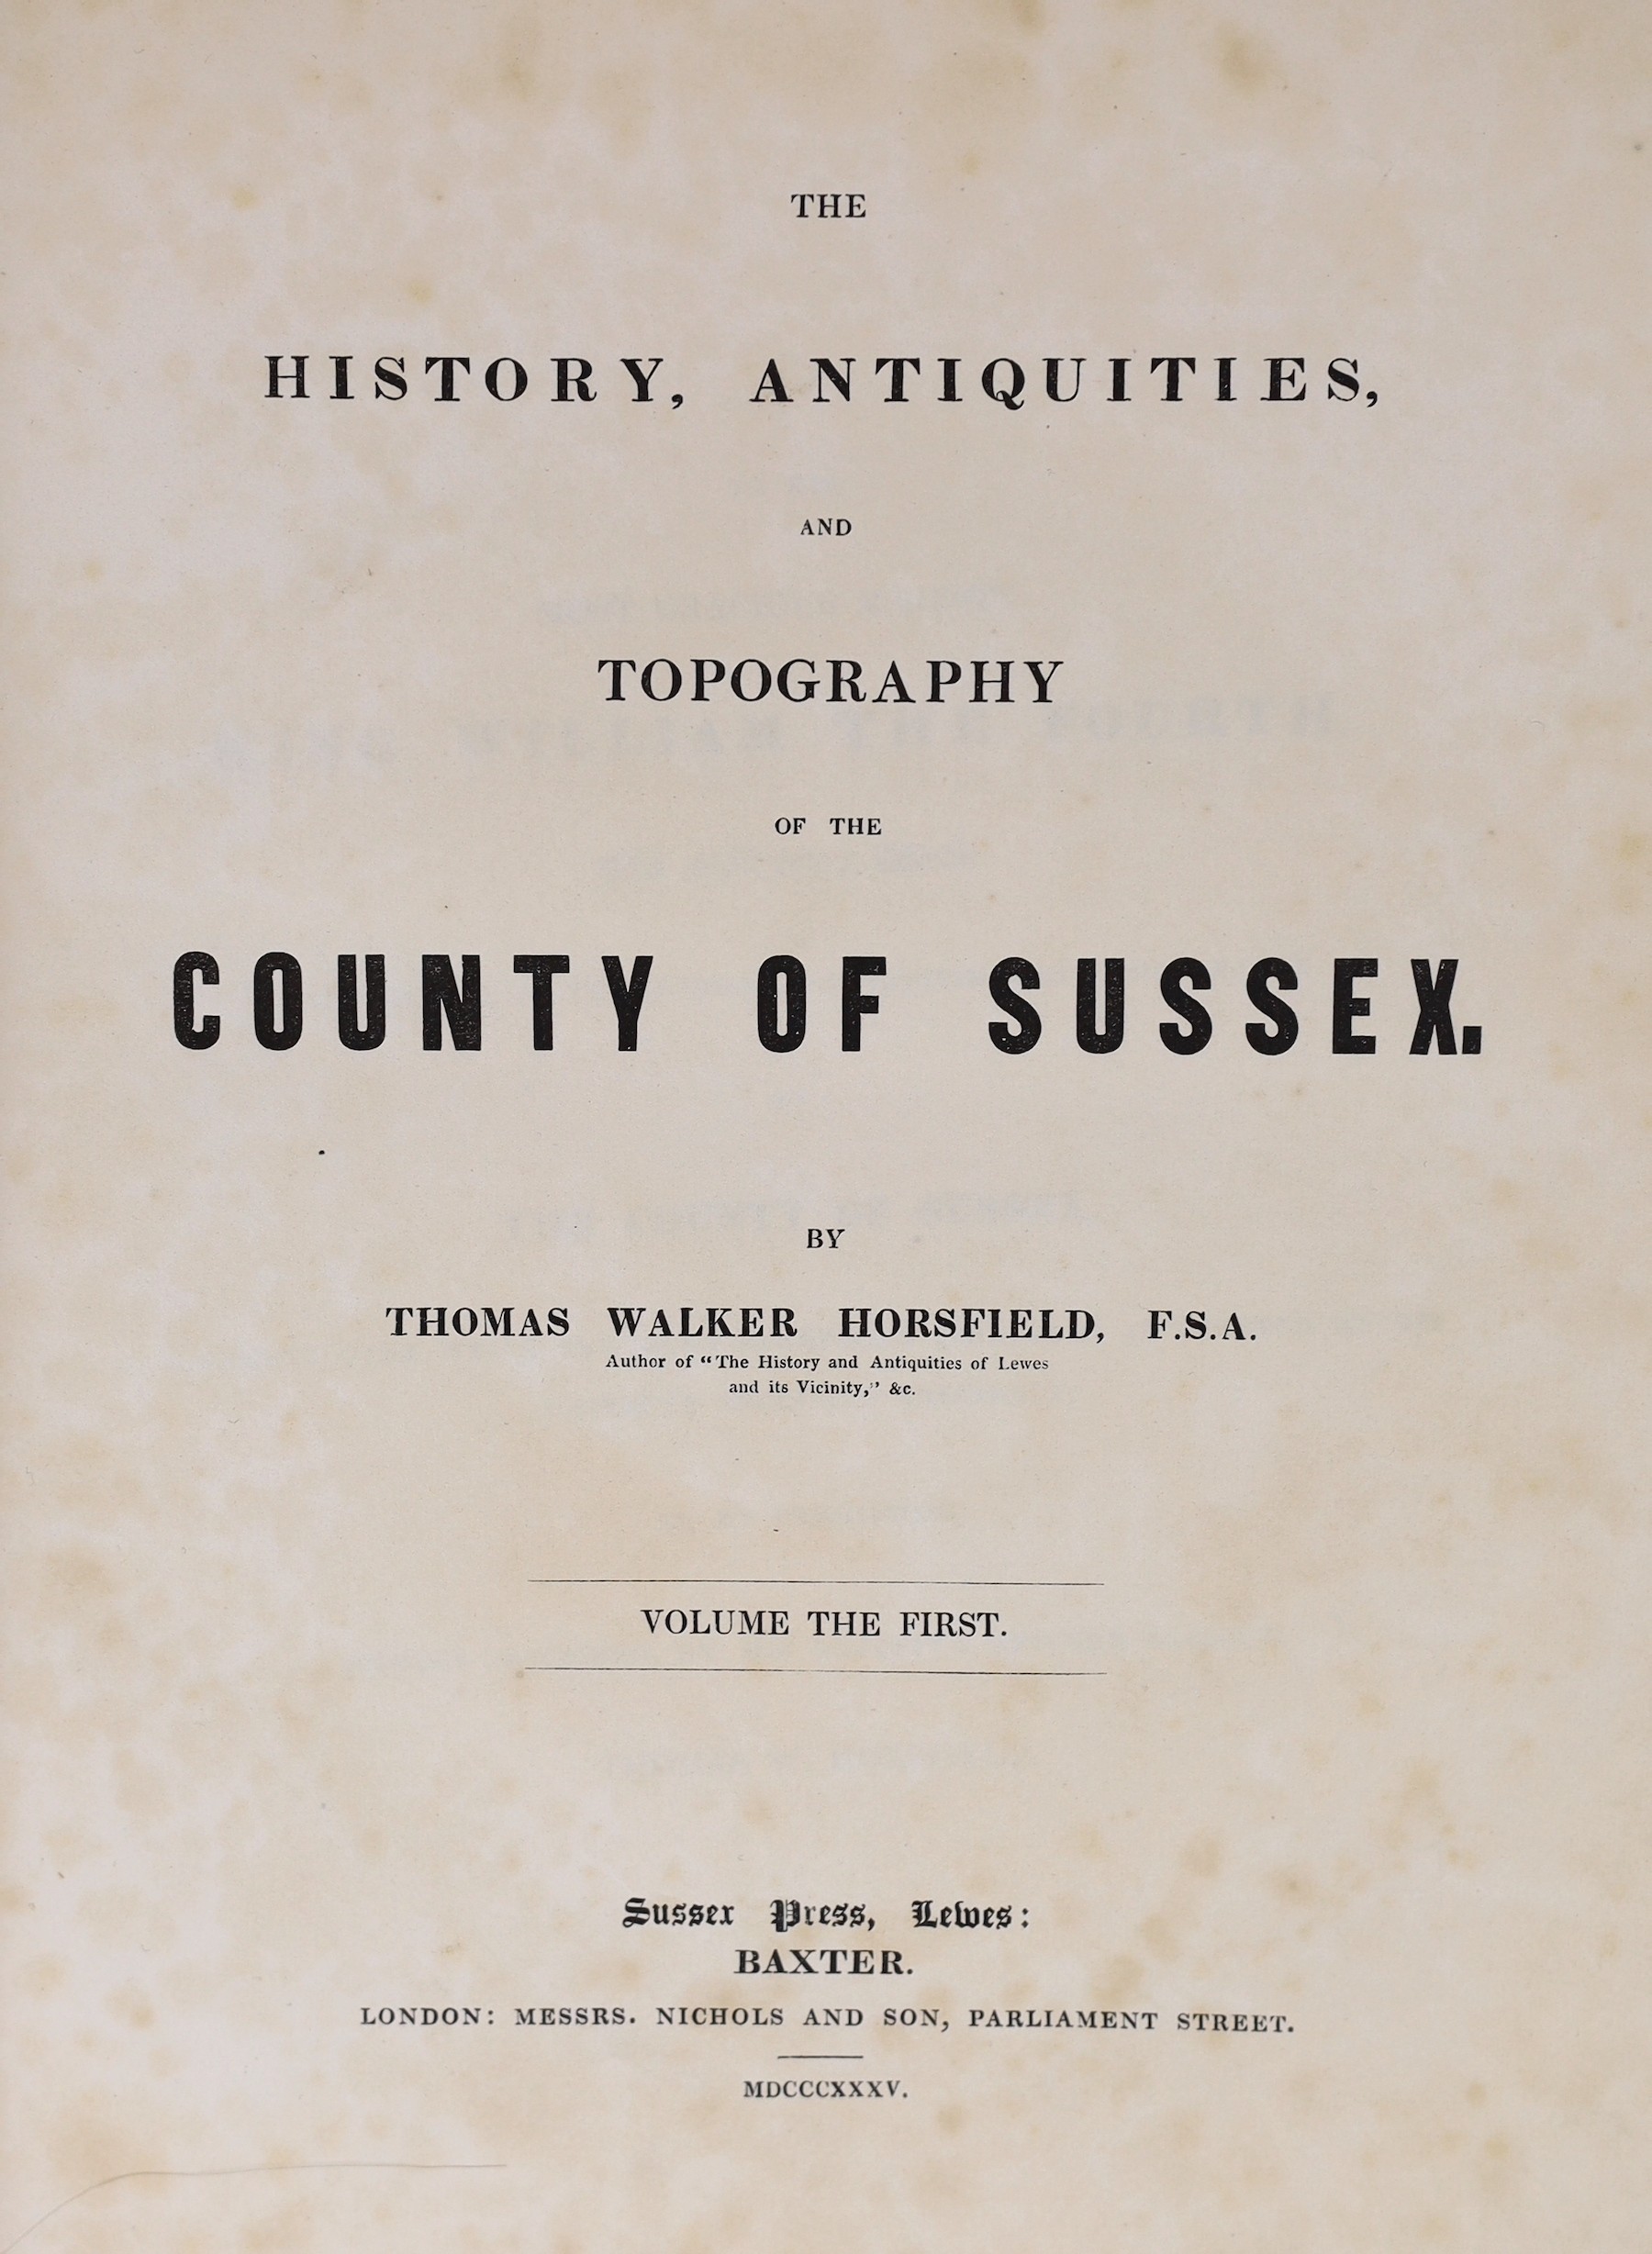 Horsfield, Thomas Walker - The History, Antiquities, and Topography of the County of Sussex, 2 vols, 4to, 2 folding maps of Sussex,(map in vol.1 torn), 2 engraved portrait frontispieces (loose in vol. 1), 54 plates, cont